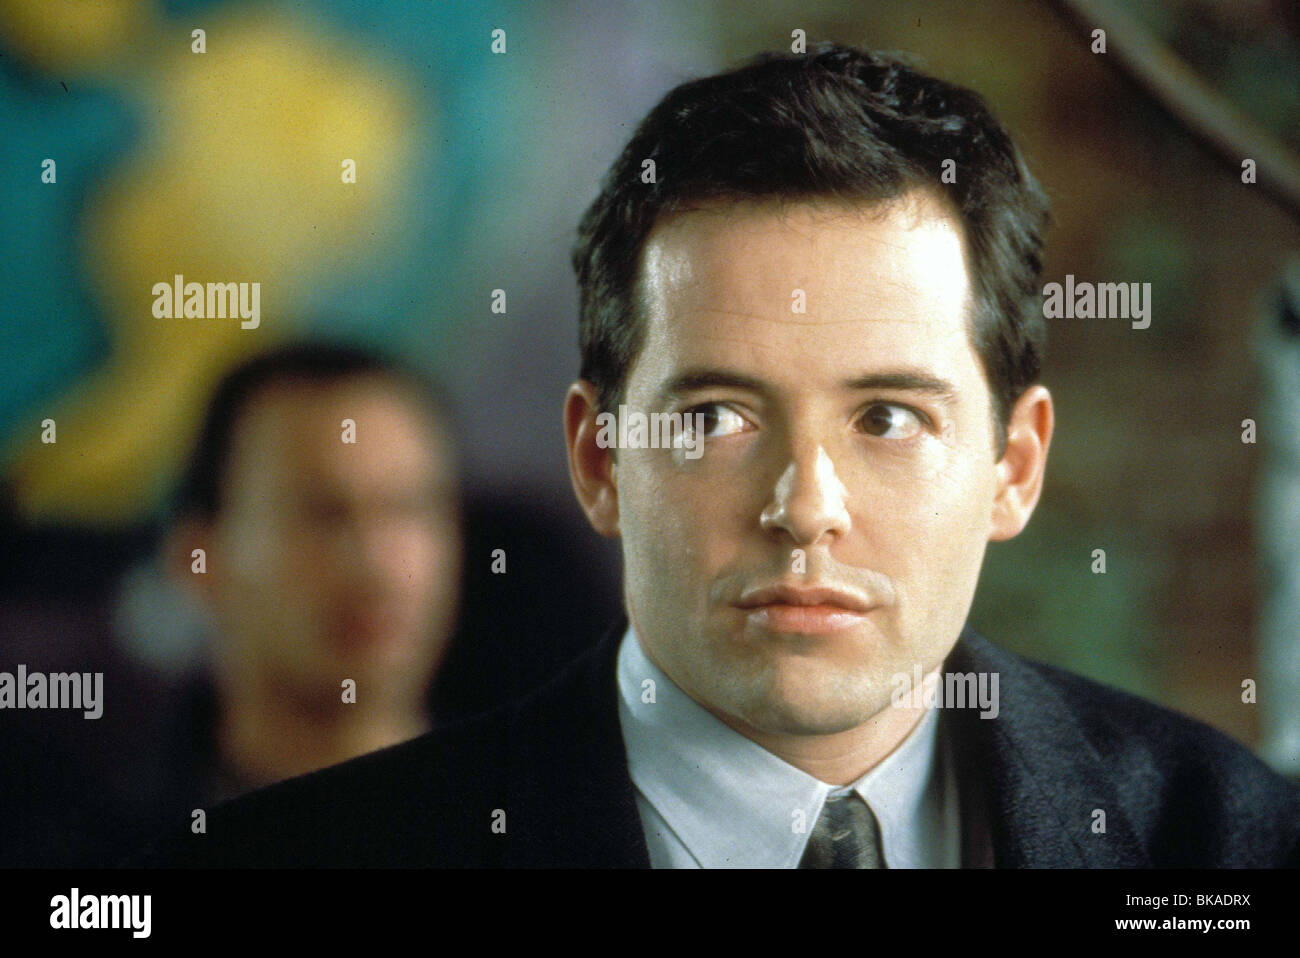 THE CABLE GUY (1996) MATTHEW BRODERICK CABG 056 Stock Photo